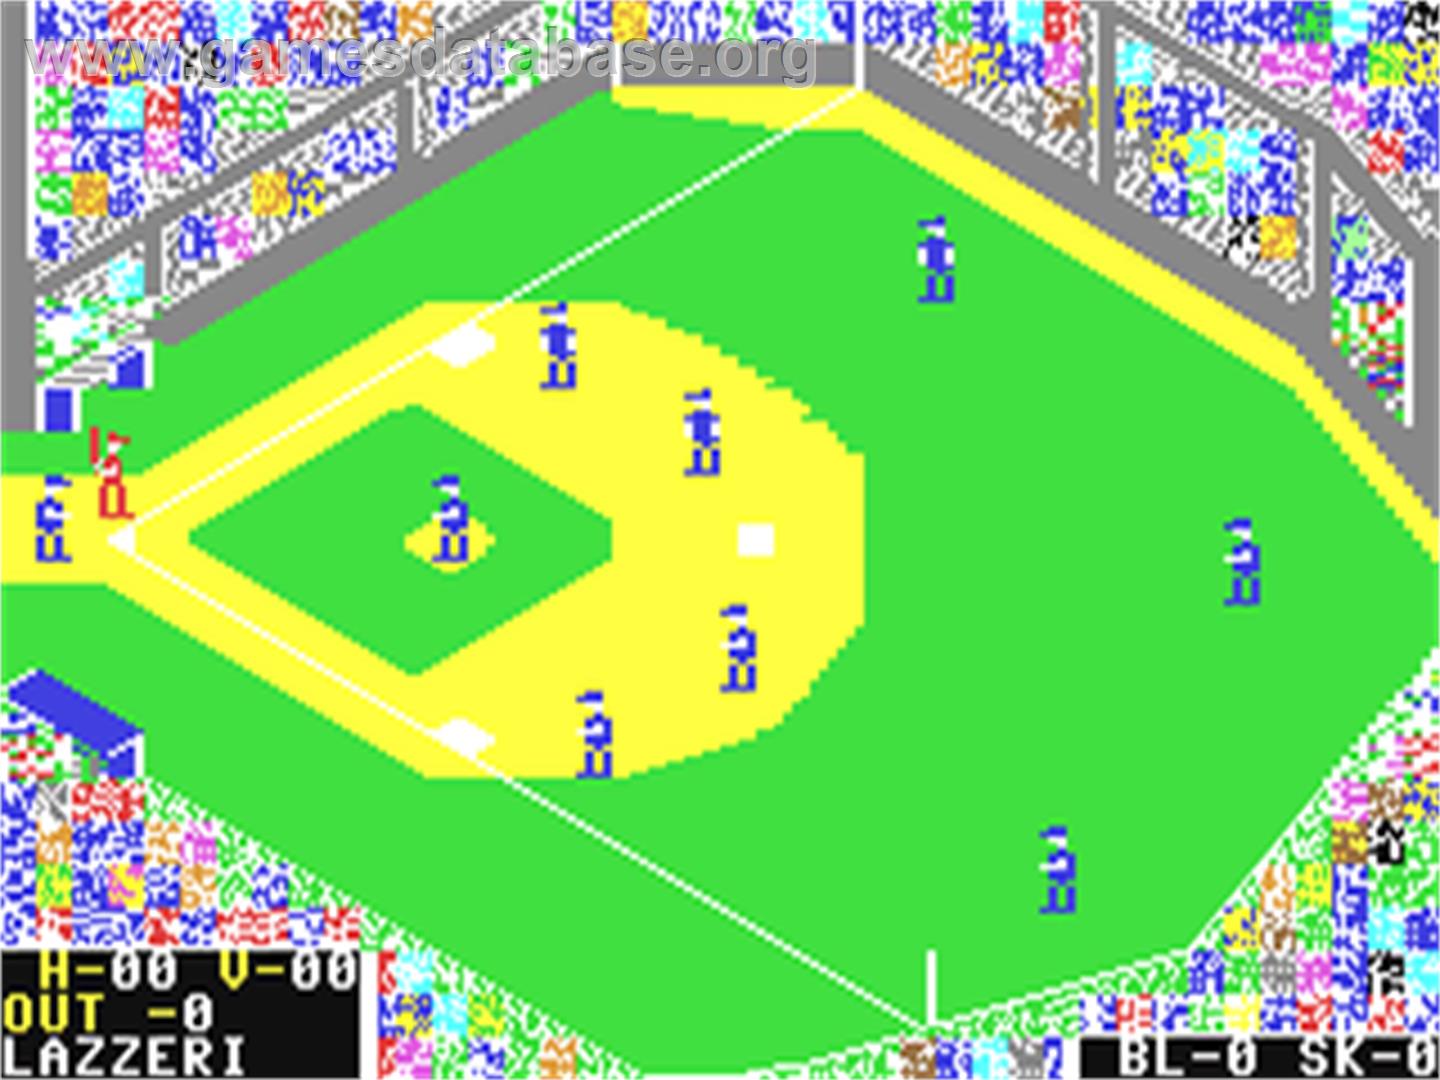 The World's Greatest Baseball Game - Commodore 64 - Artwork - In Game